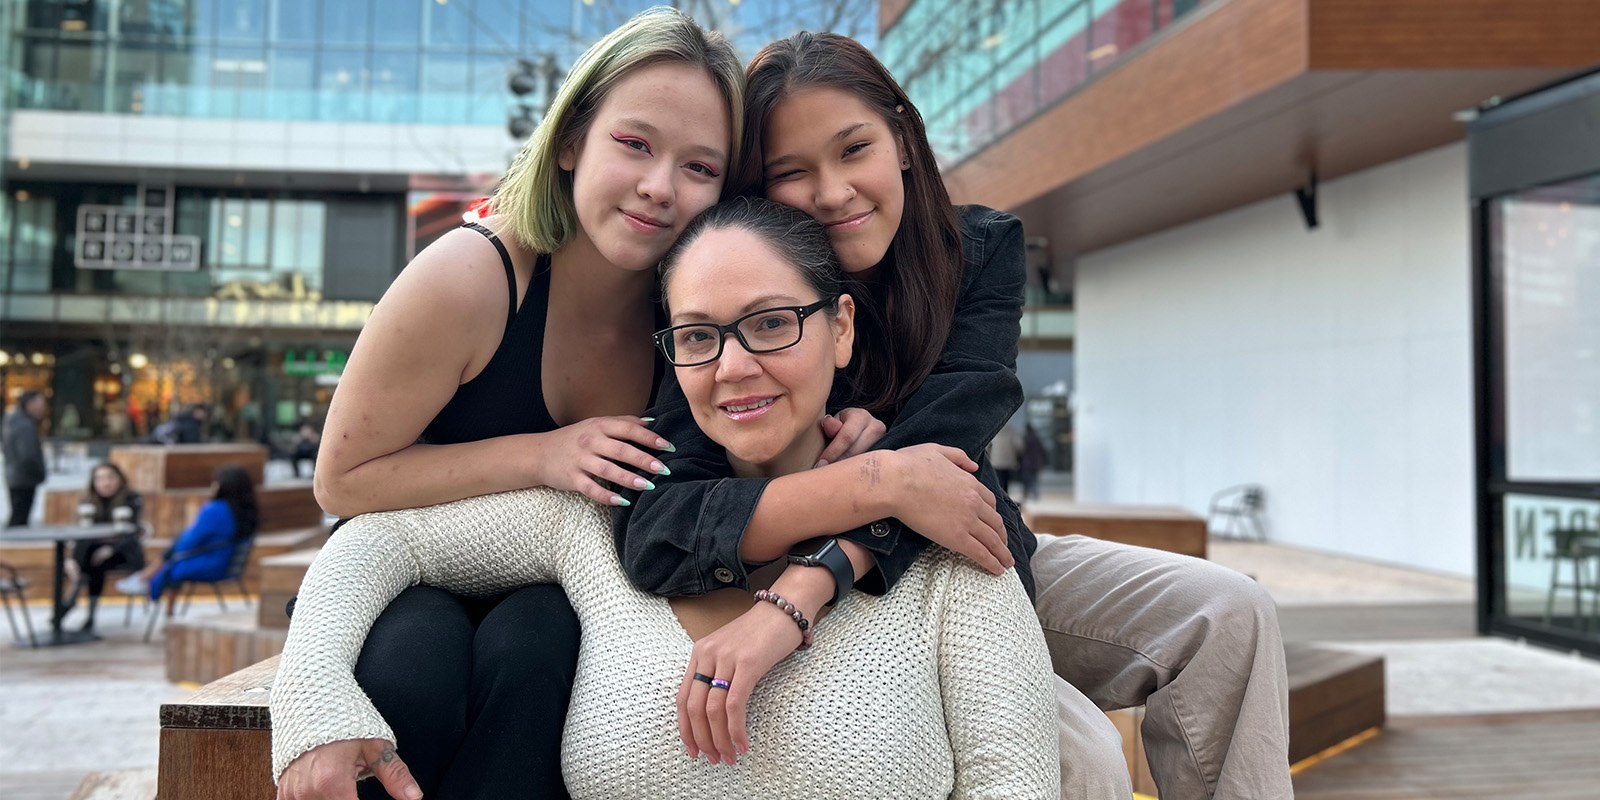 BCIT alumna Susanne Muldon sits between two of her teenage daughters smiling